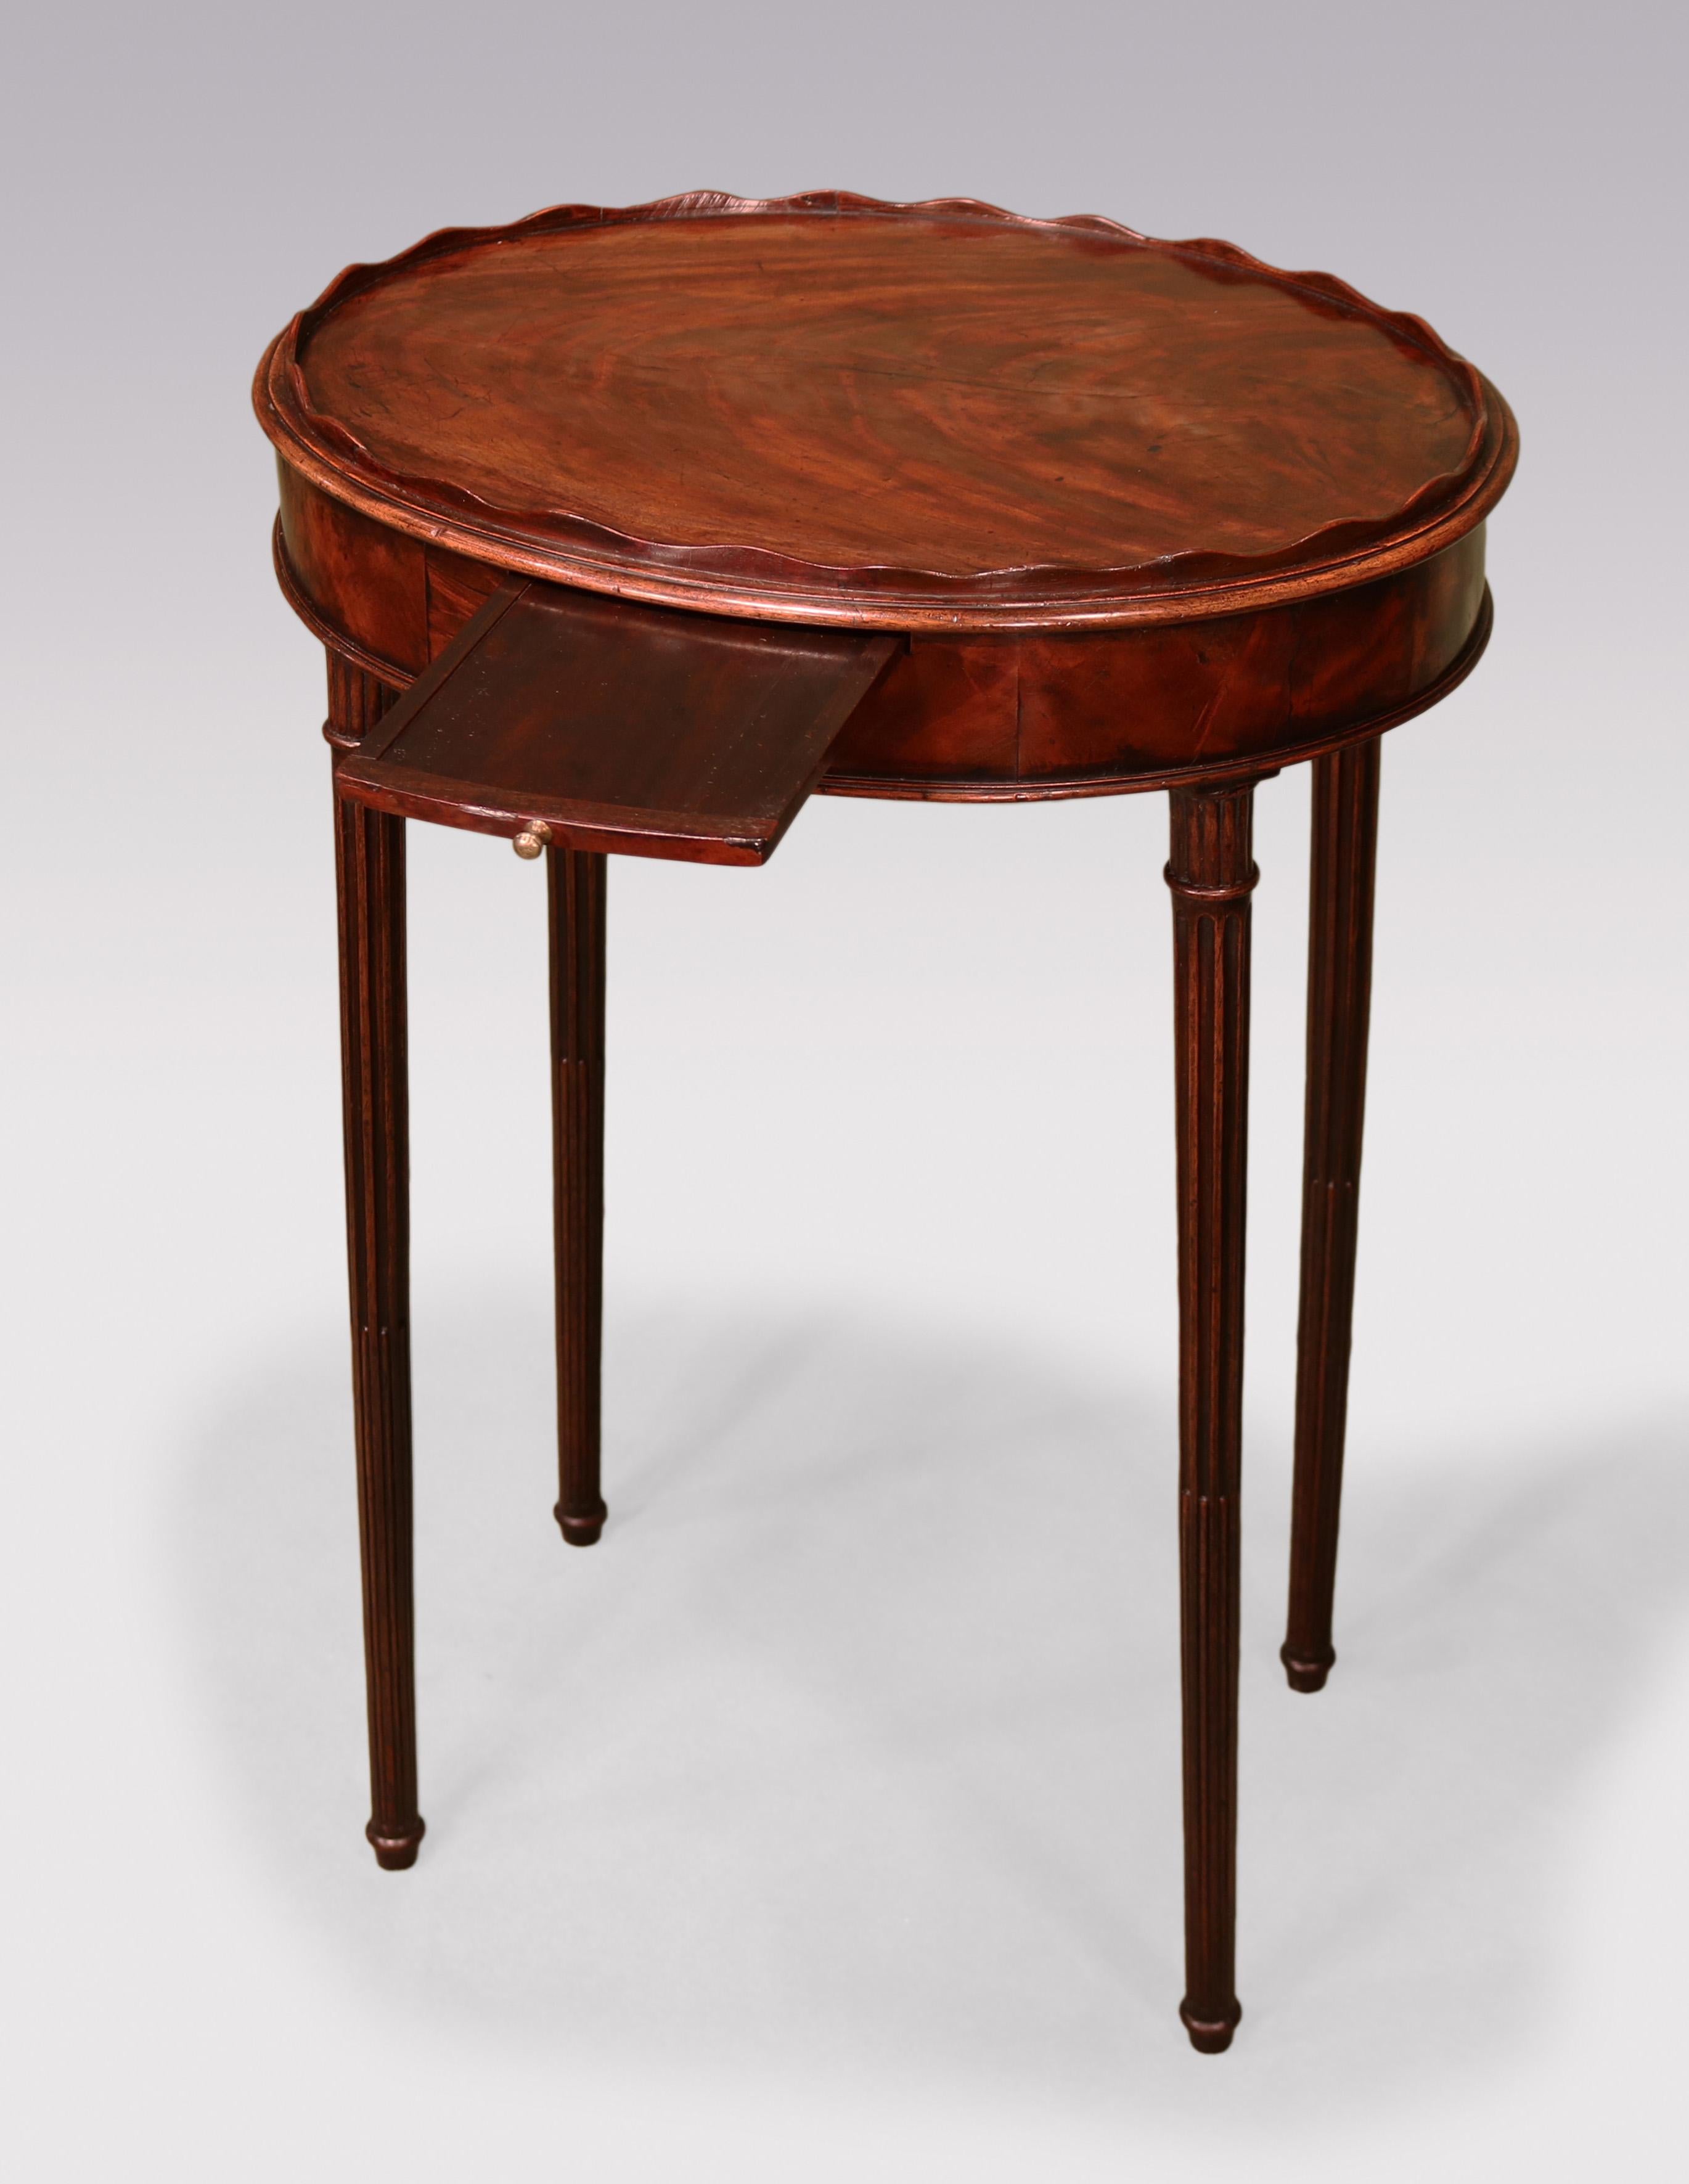 A mid-18th Century George III period Kettle Stand having flame-figured mahogany oval top with scalloped gallery above frieze with slide, supported on ring-turned stop-fluted tapering legs.
Depth: 13.5